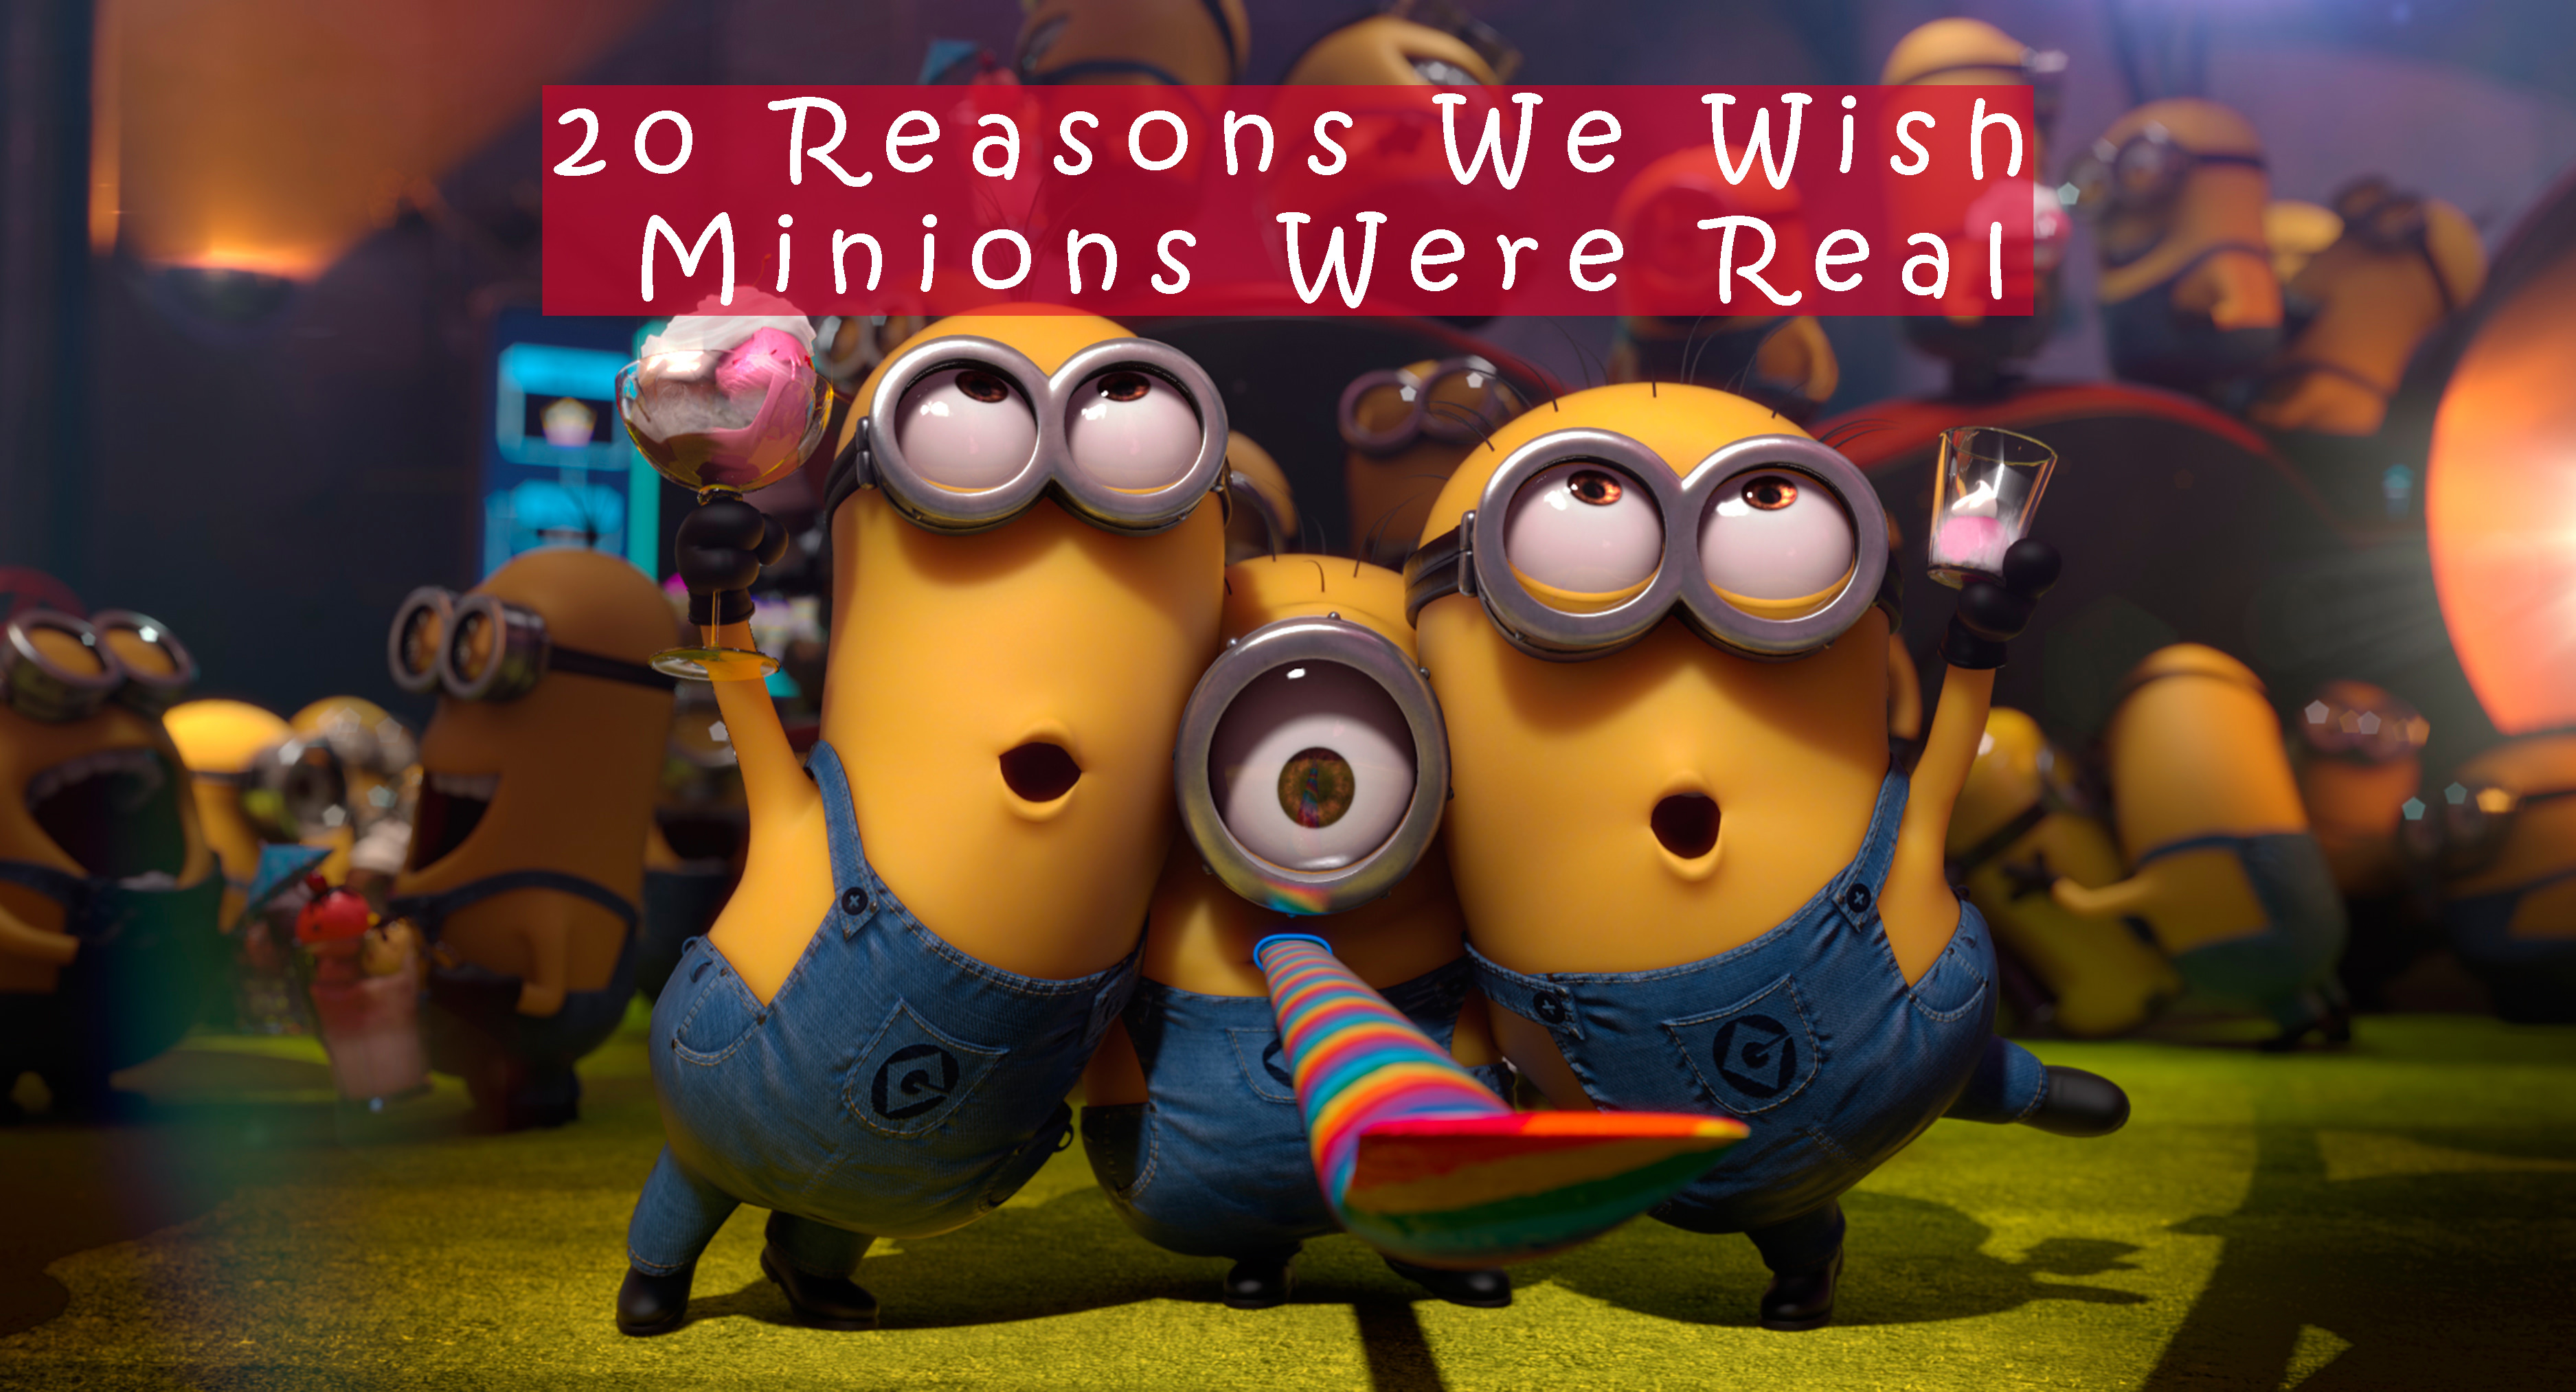 Minions Are Cute – There Are Reasons We Wish Minions Were Real